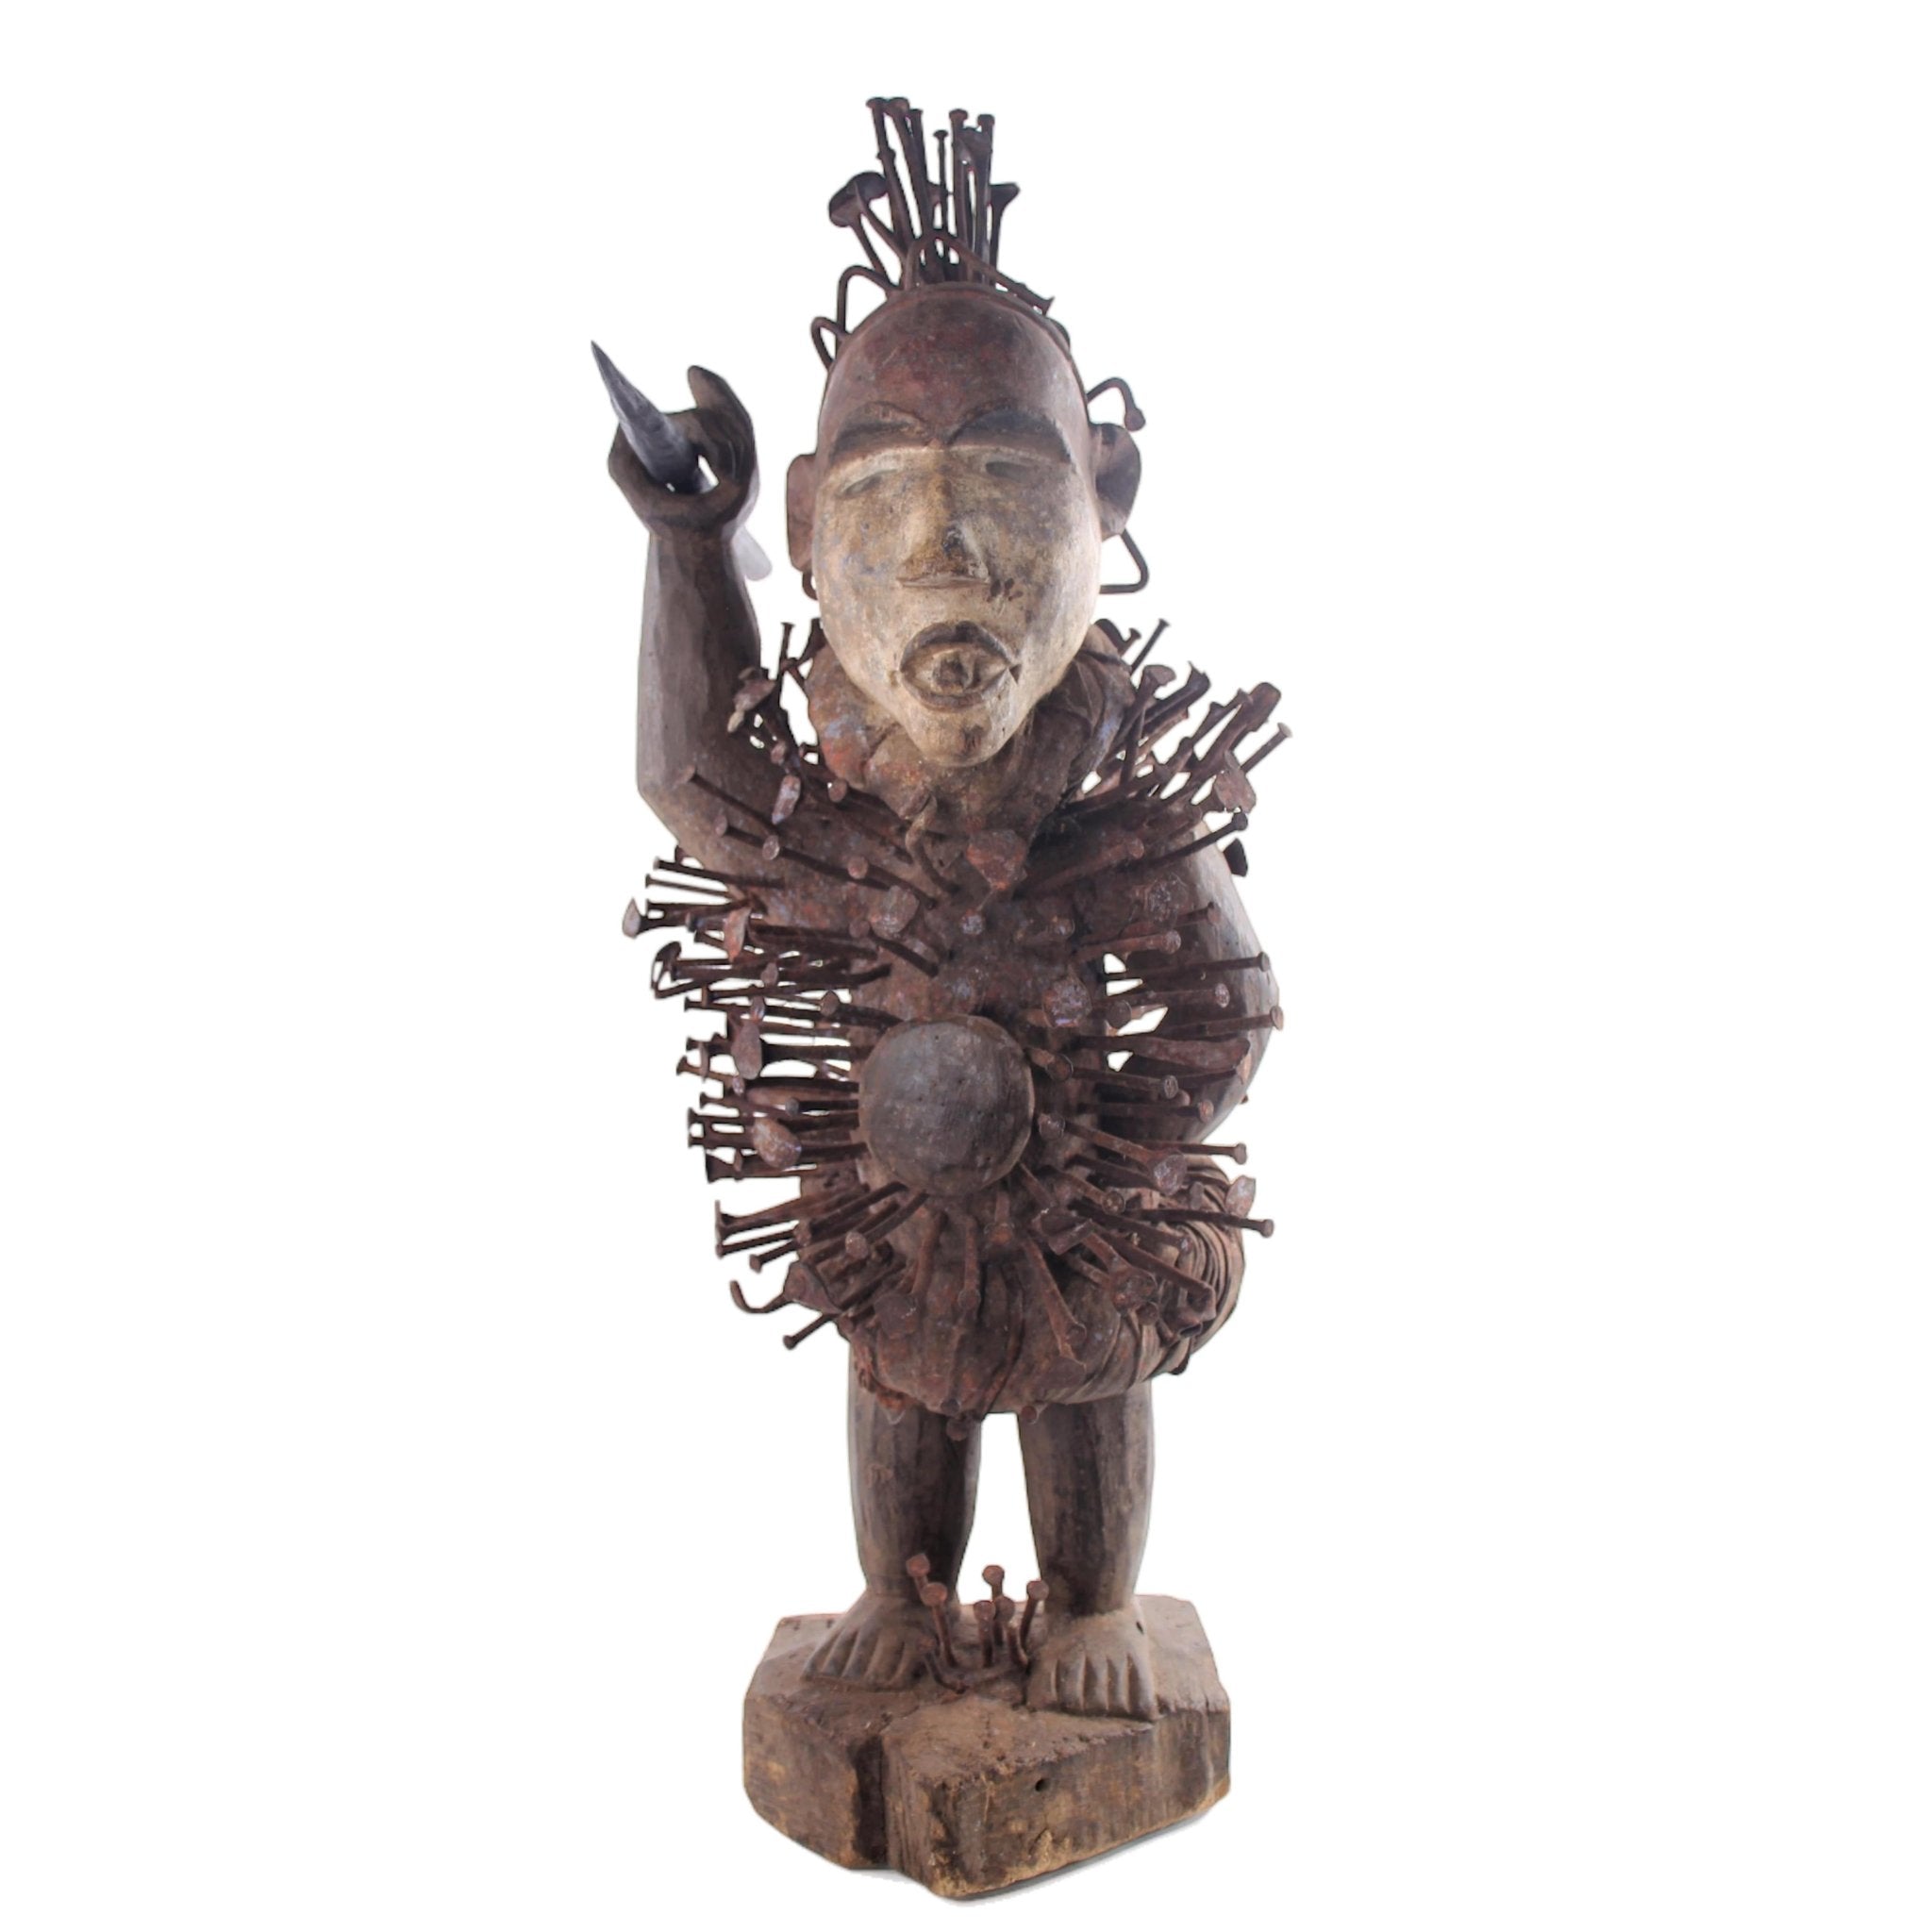 Bakongo Tribe Fetishes ~28.7" Tall - African Angel Art